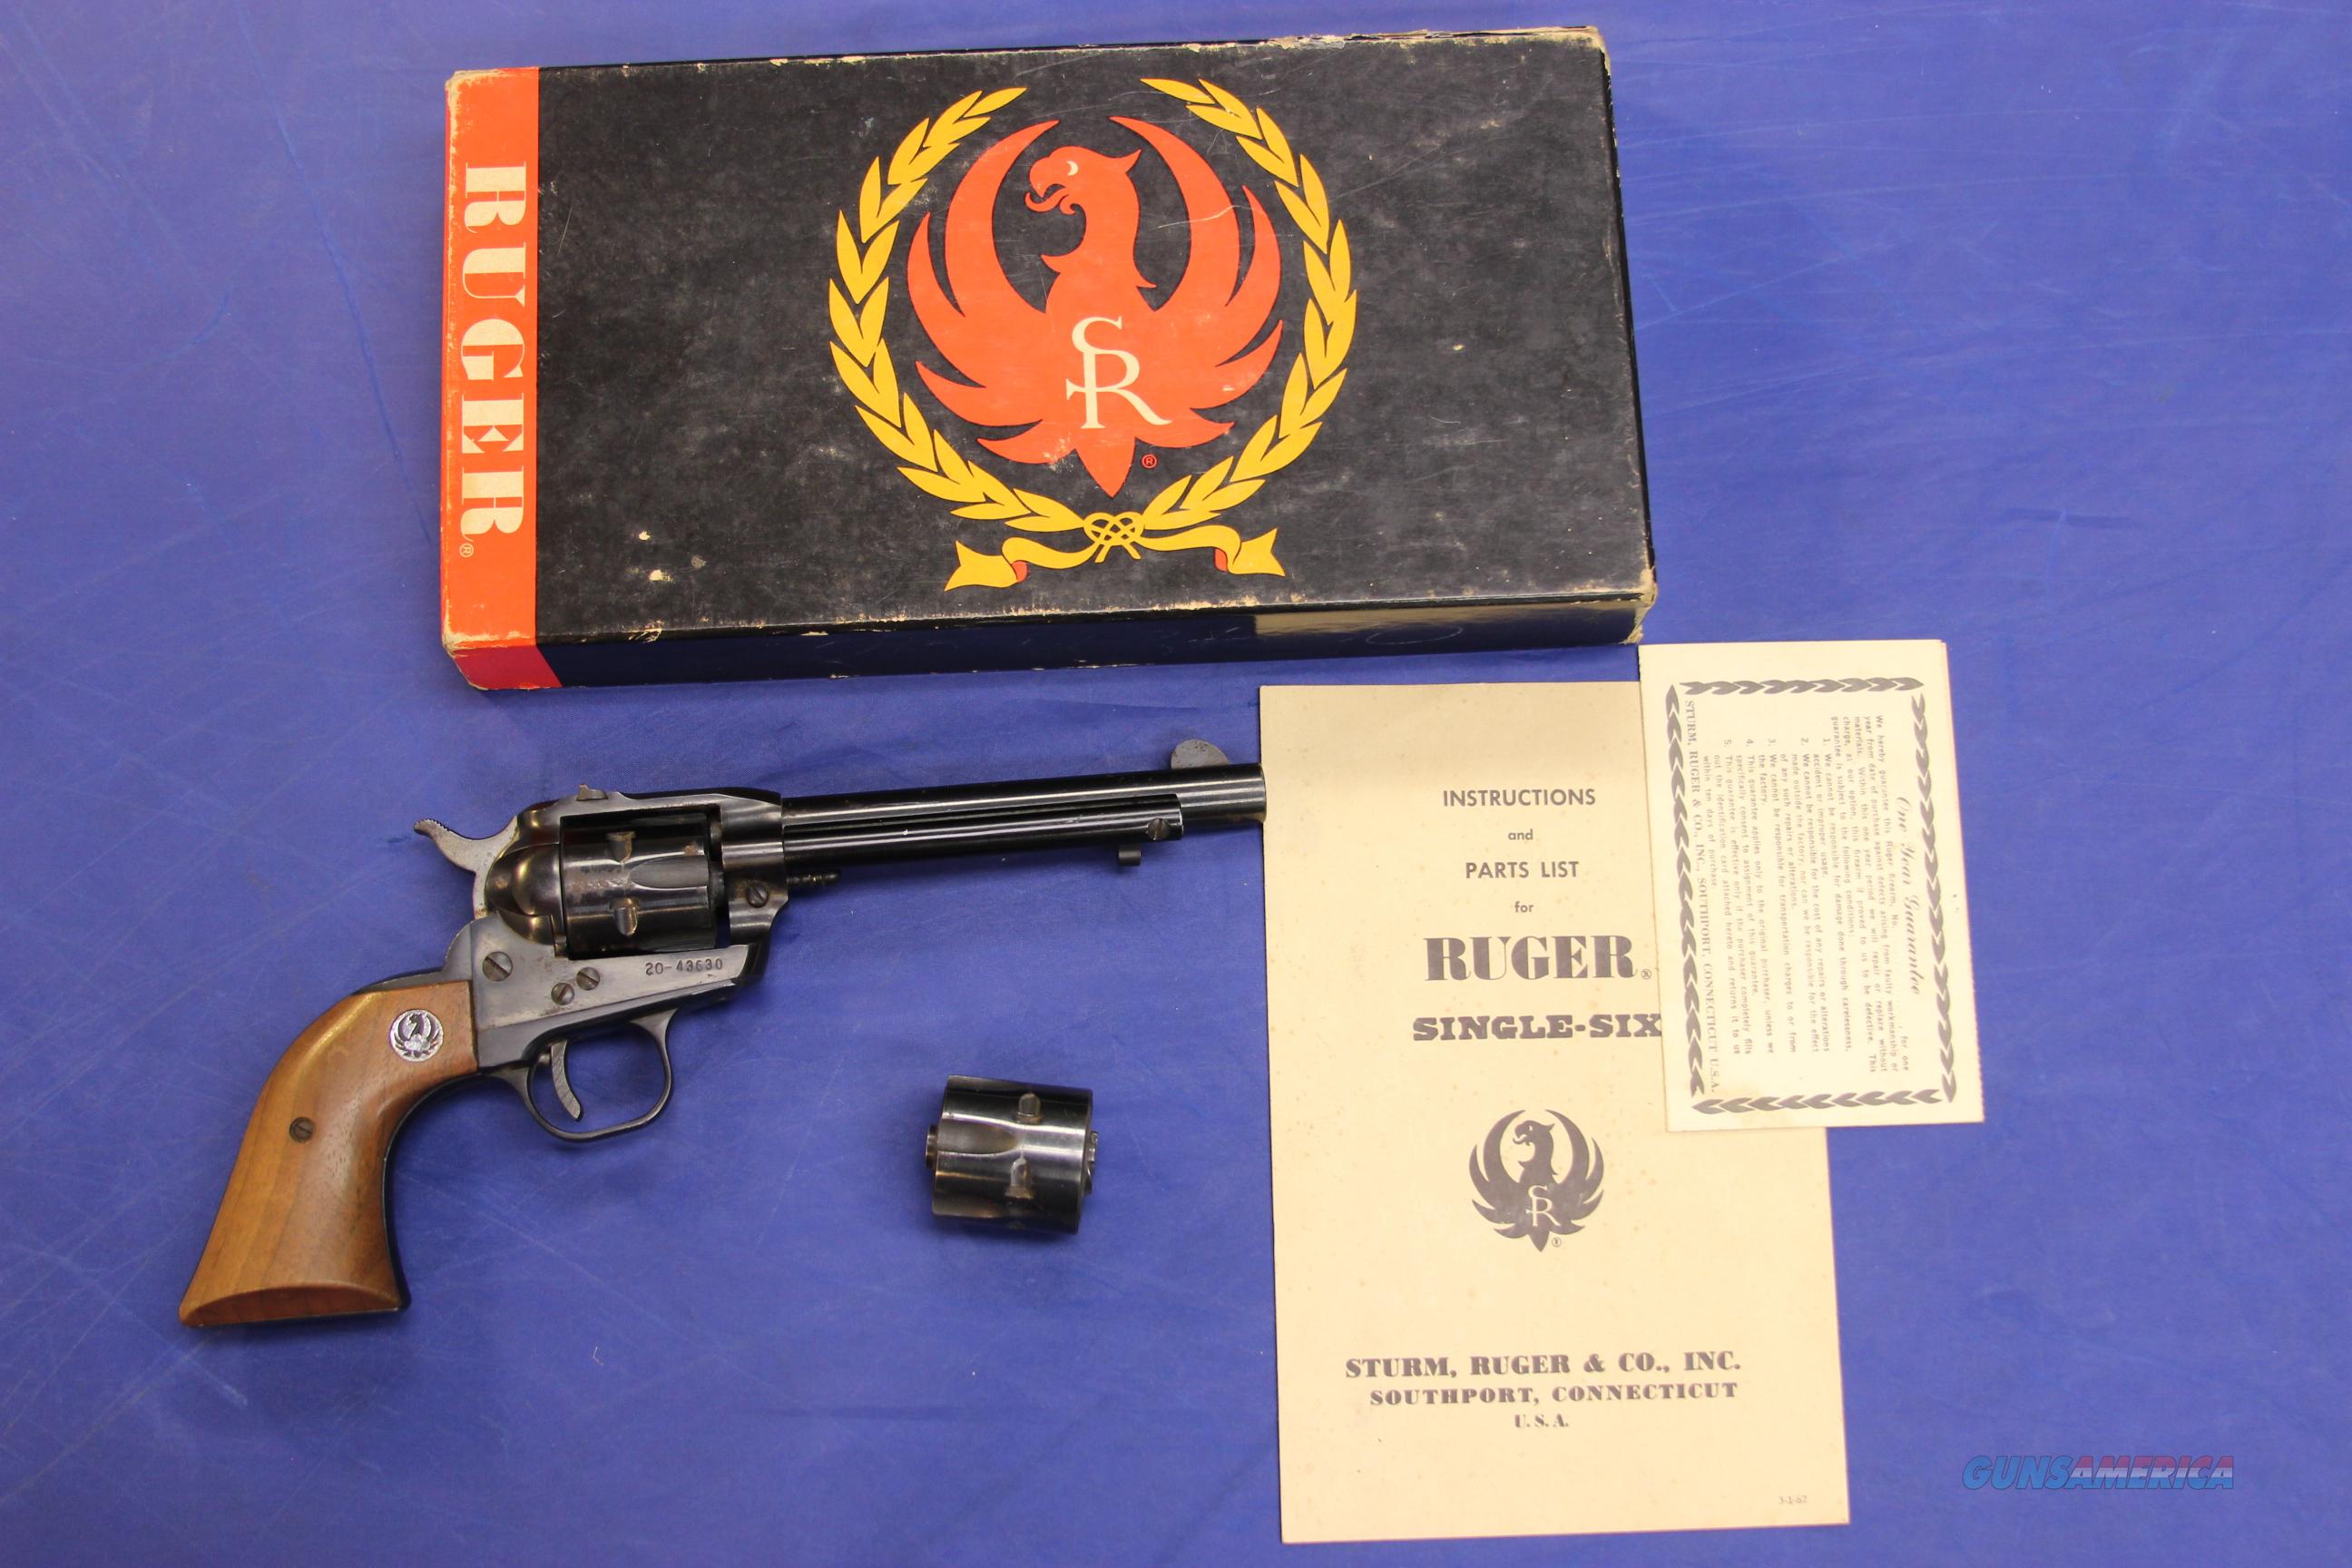 RUGER SINGLE- SIX .22 LR w/ BOX - 1970 Mfg. for sale